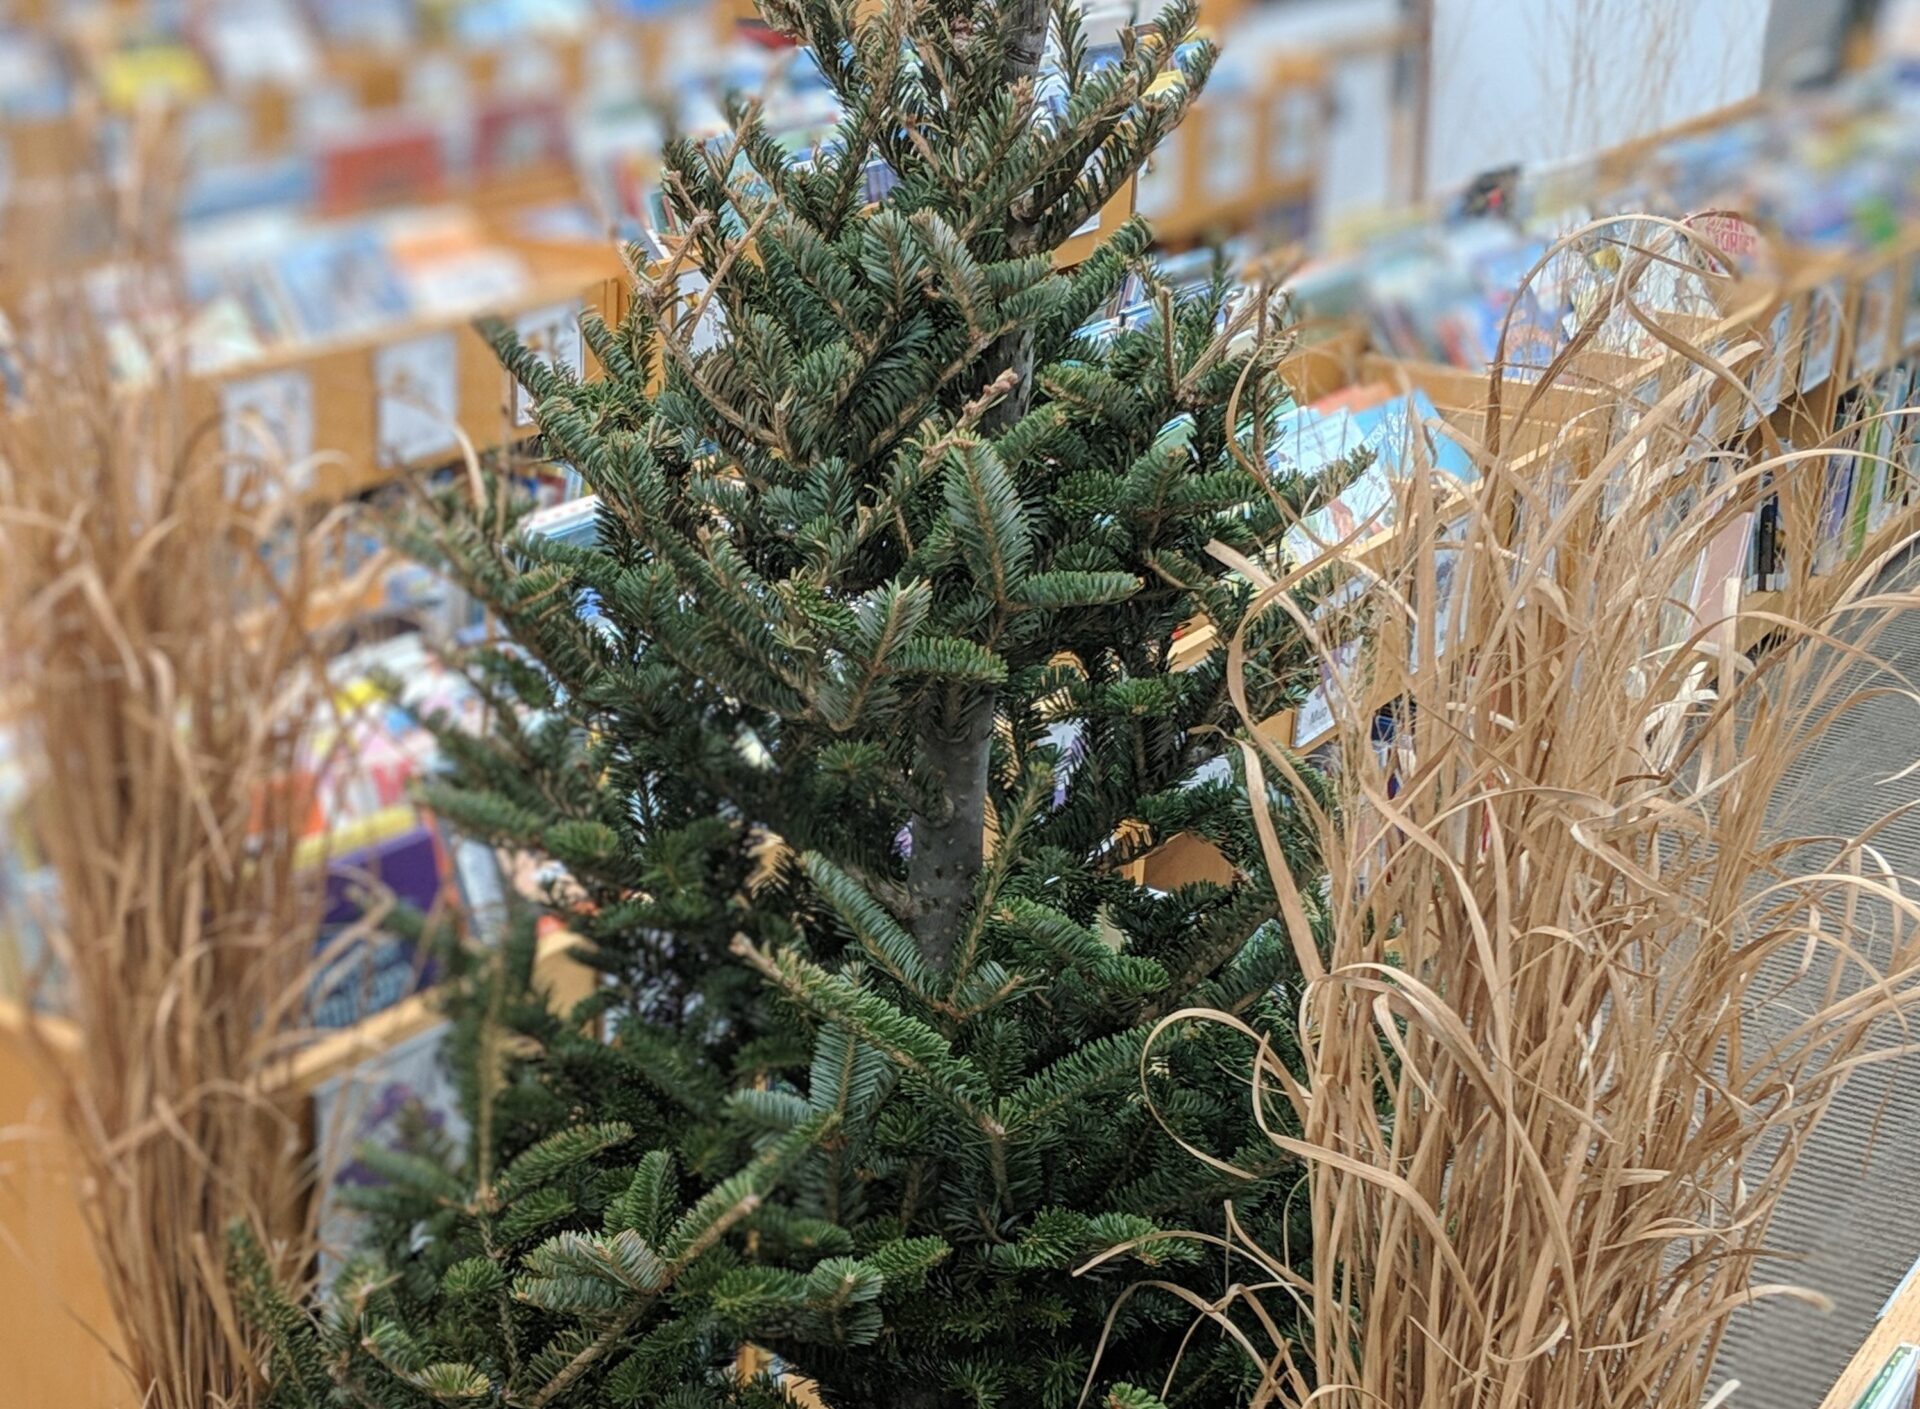 A small, undecorated Christmas tree stands in a library with books in the background, partially obscured by dried ornamental grasses.